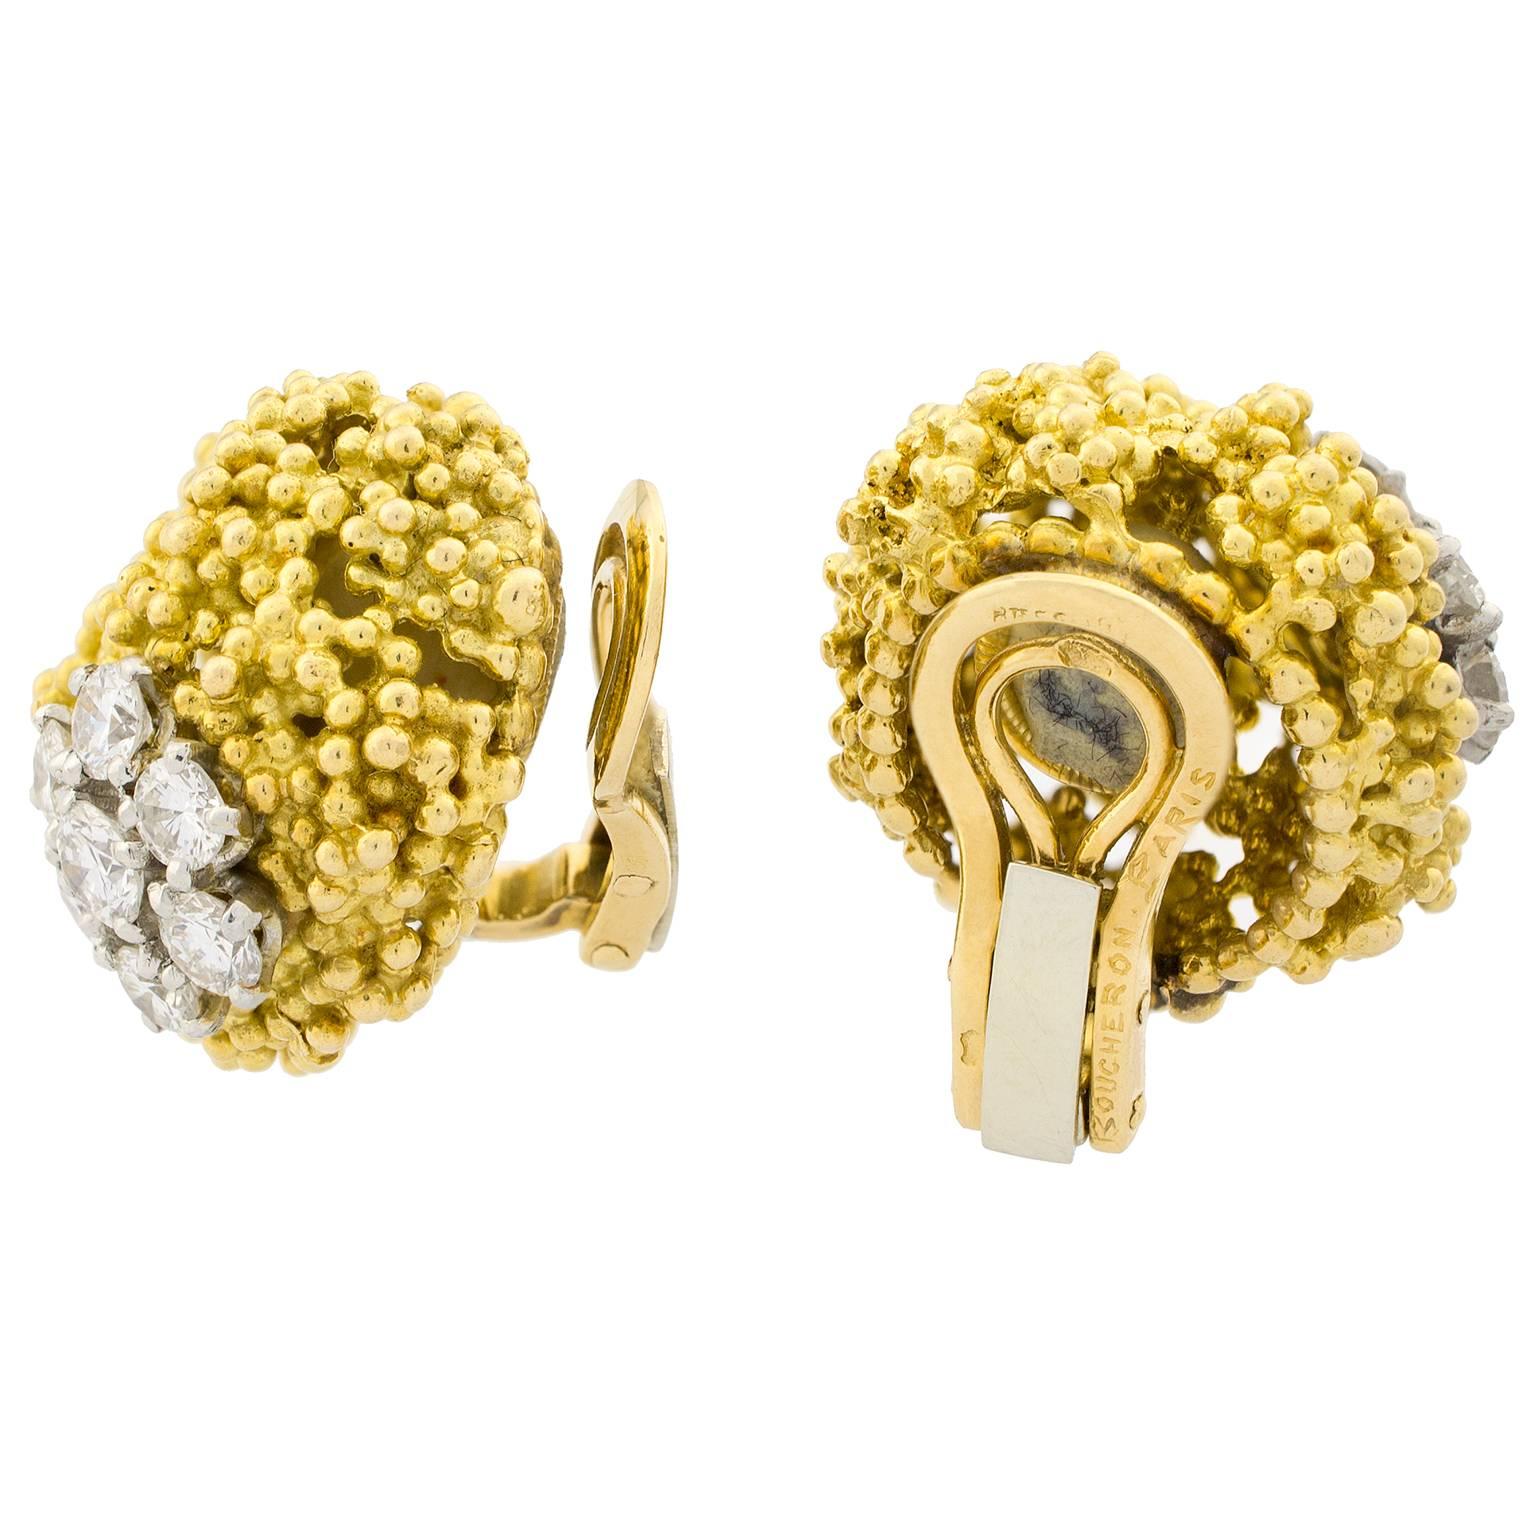 Boucheron Paris earrings, from the Caviar collection, in yellow and white gold with 14 round brilliant cut diamonds set in the shape of a rosette, total estimated weight of 2.00 carats.